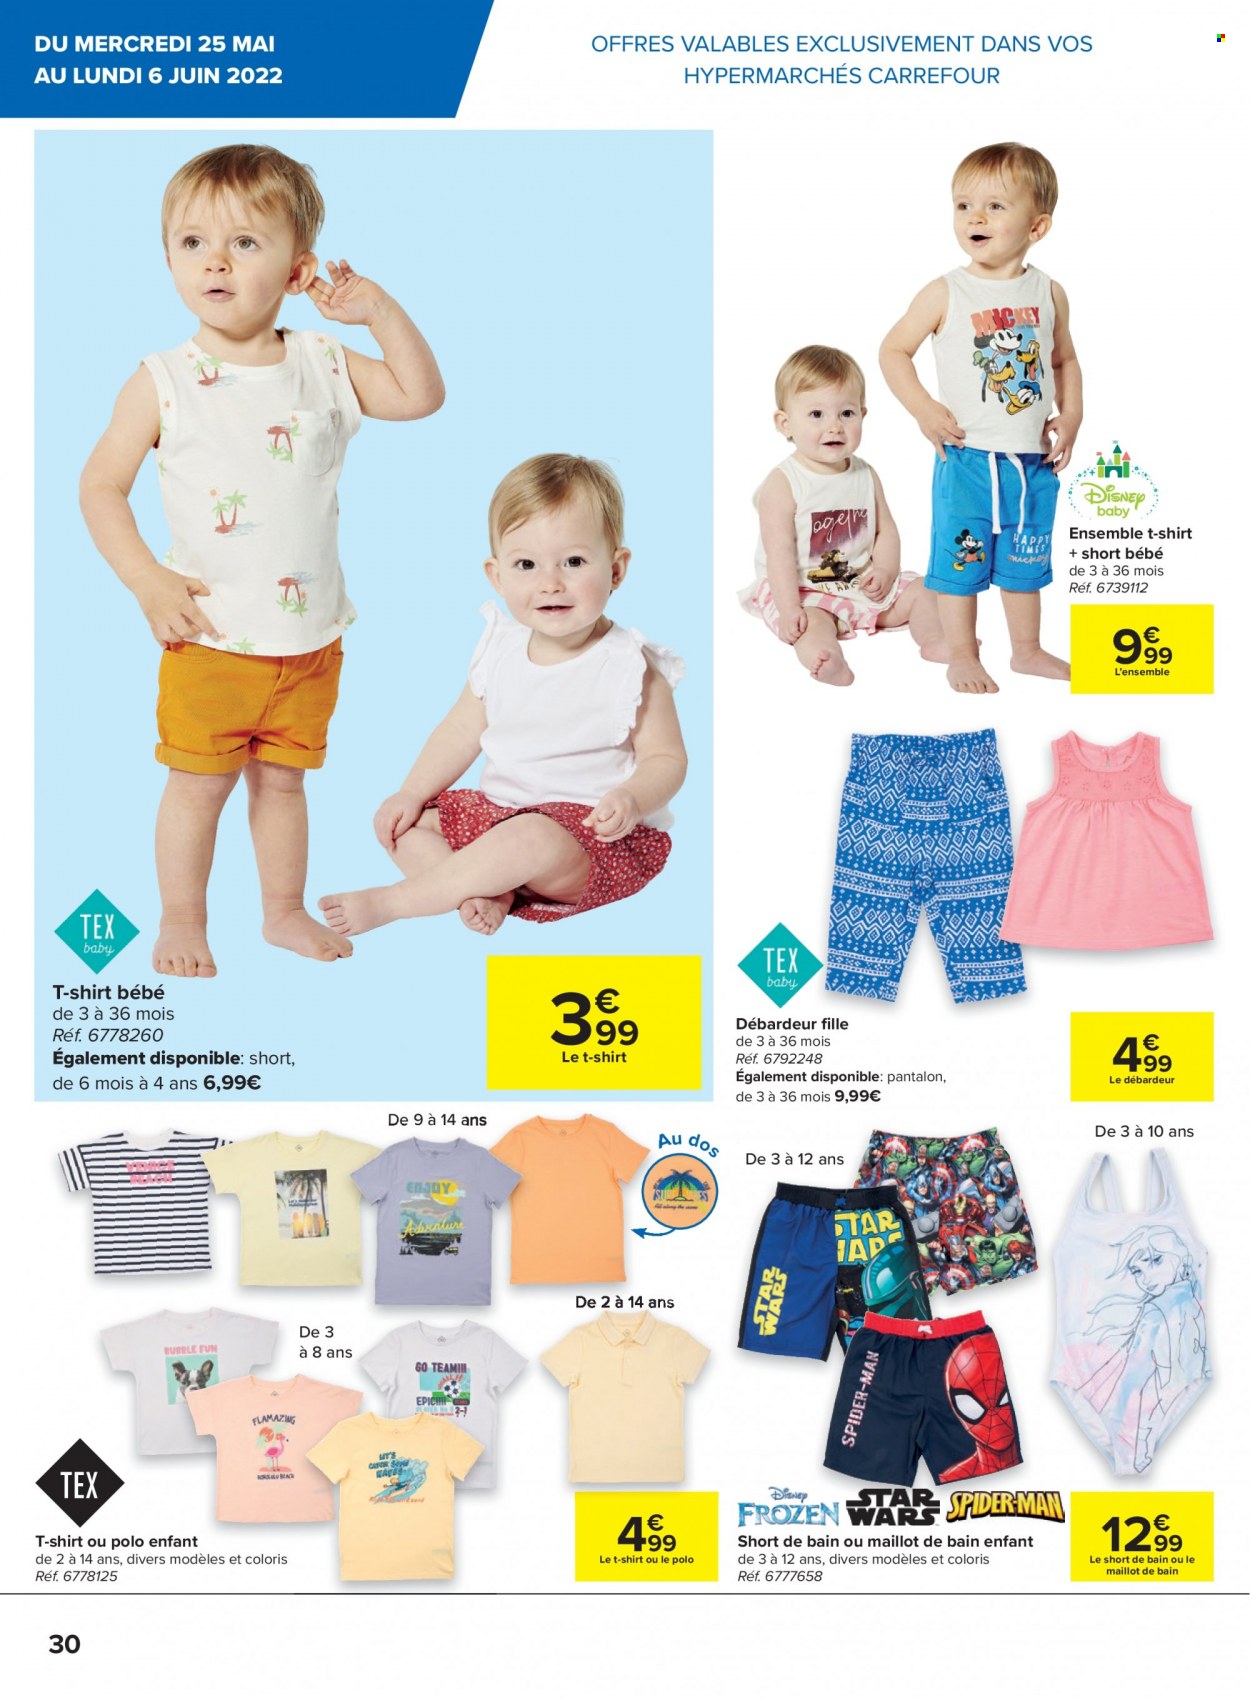 Catalogue Carrefour hypermarkt - 25.5.2022 - 31.5.2022. Page 30.